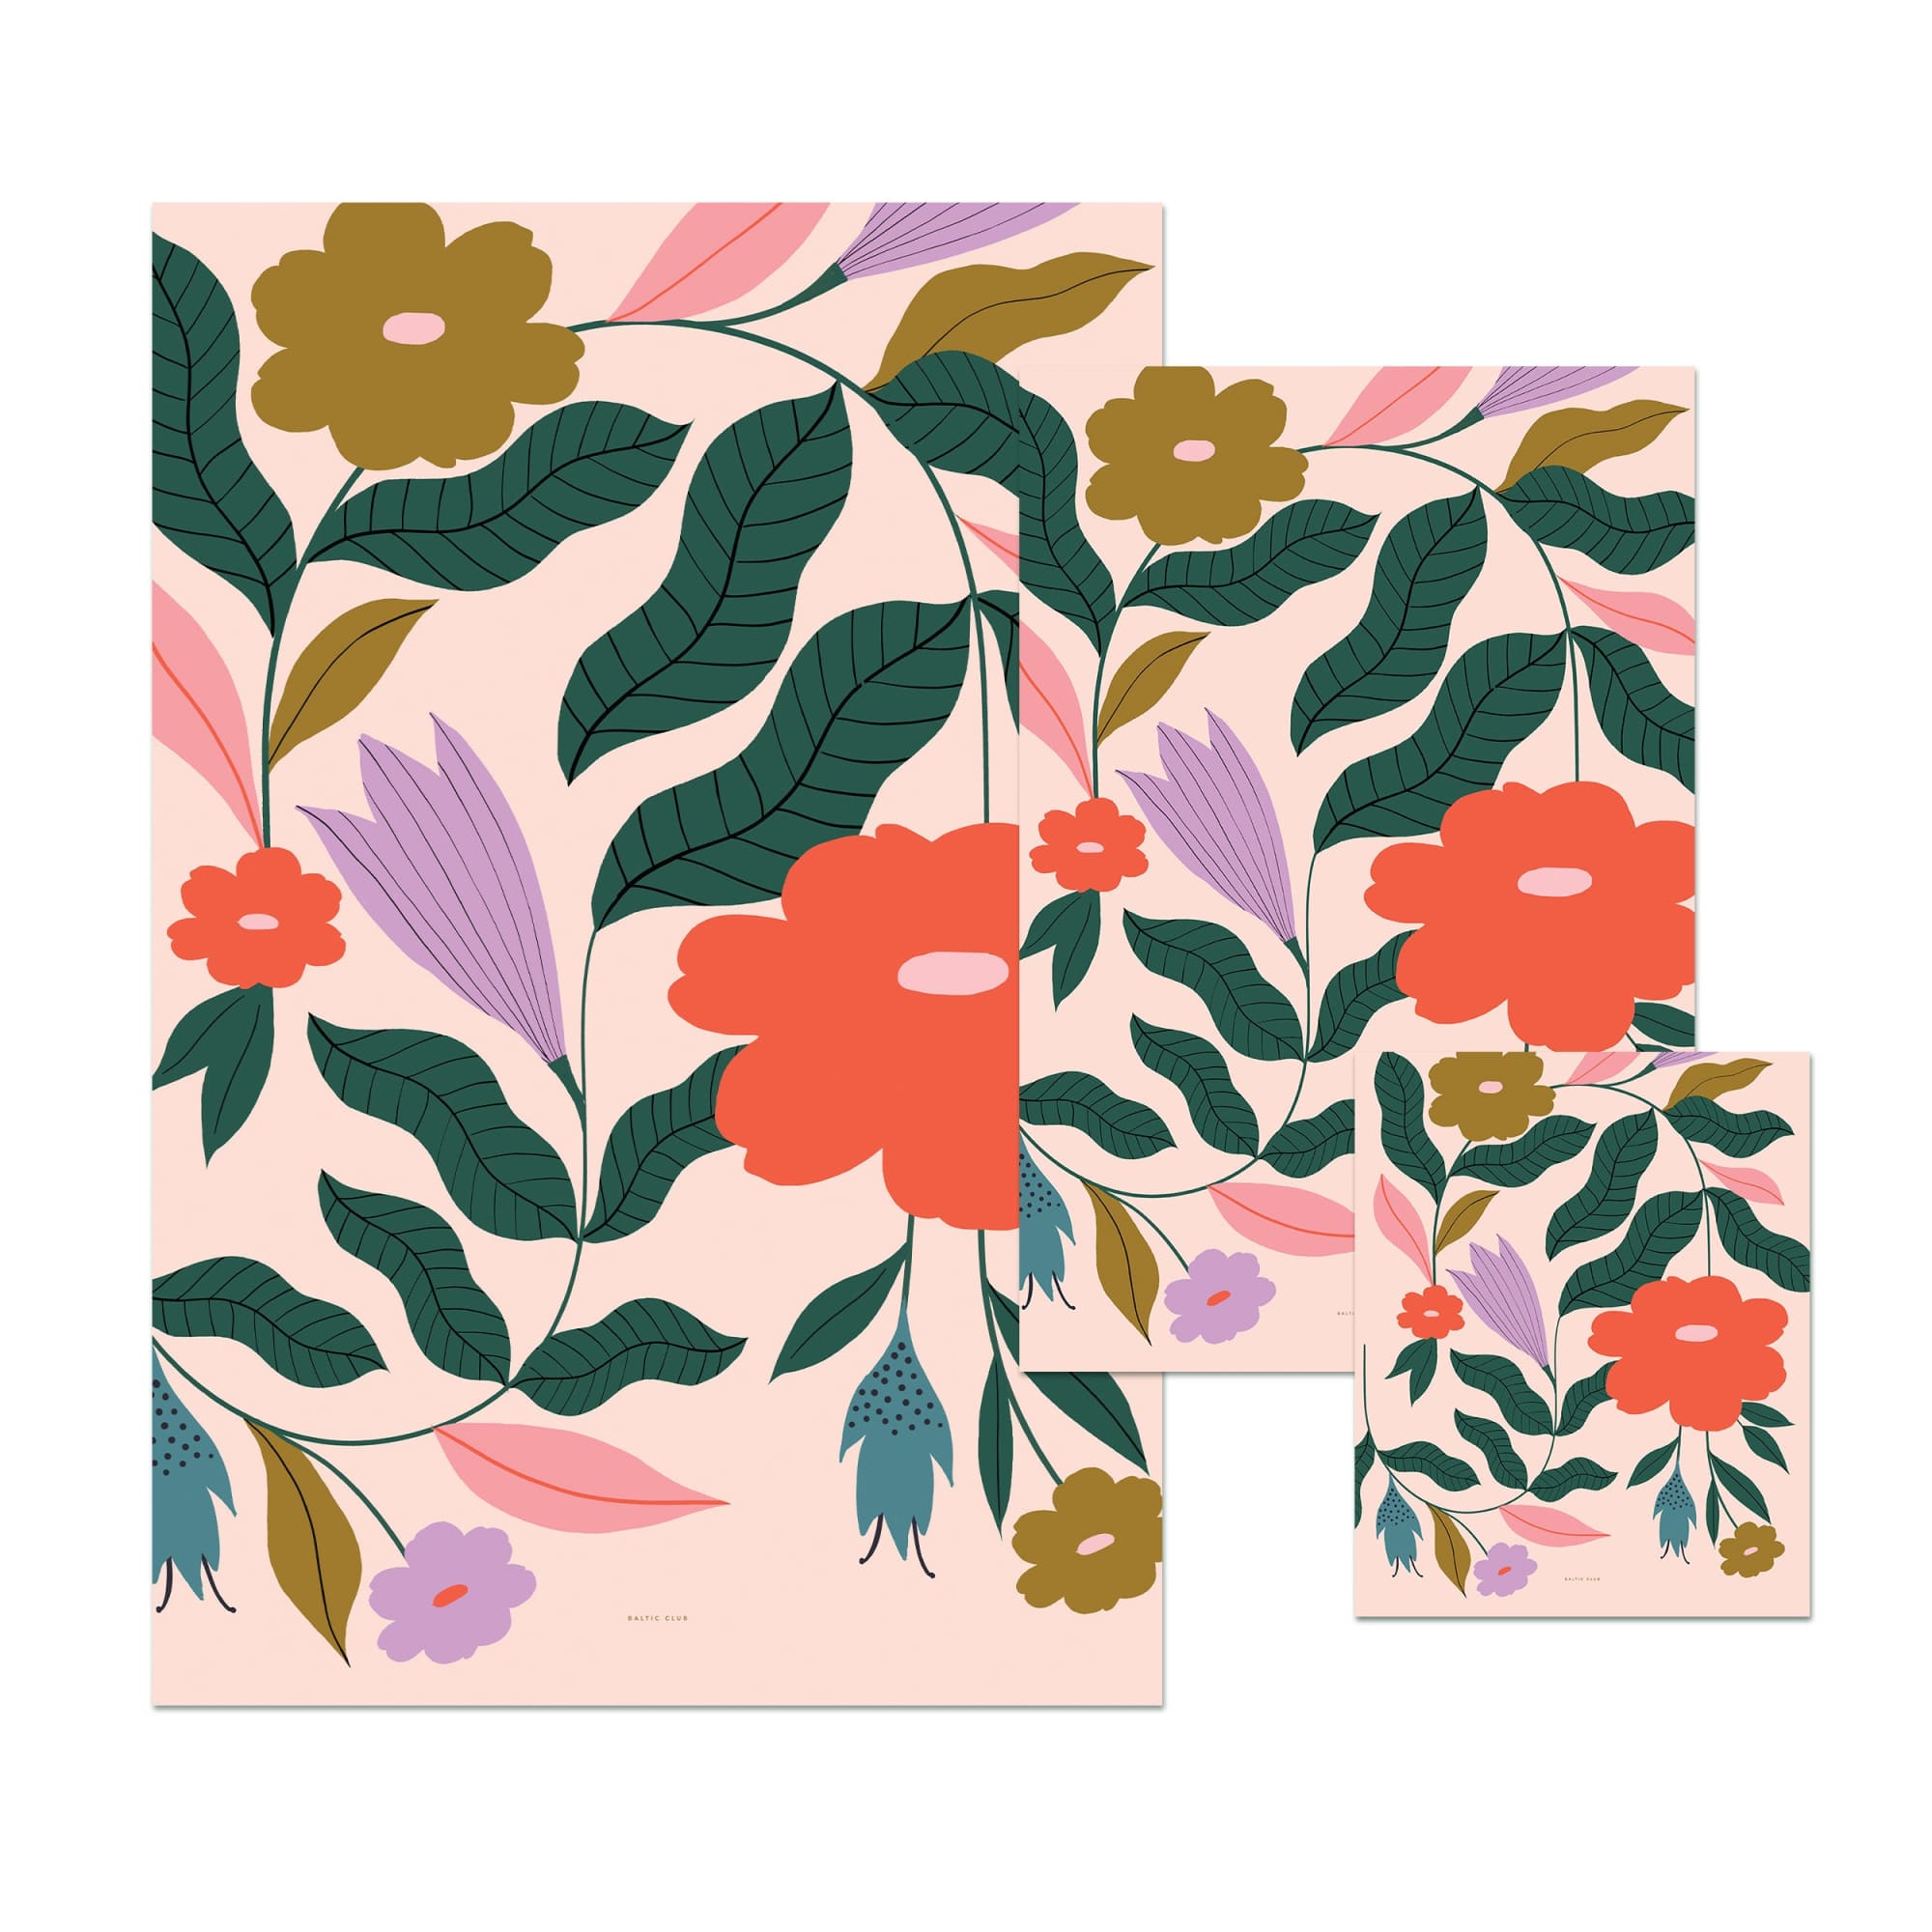 Flowers, by Susan Driscoll. An exclusive design for The Baltic Club, available in 3 sizes.